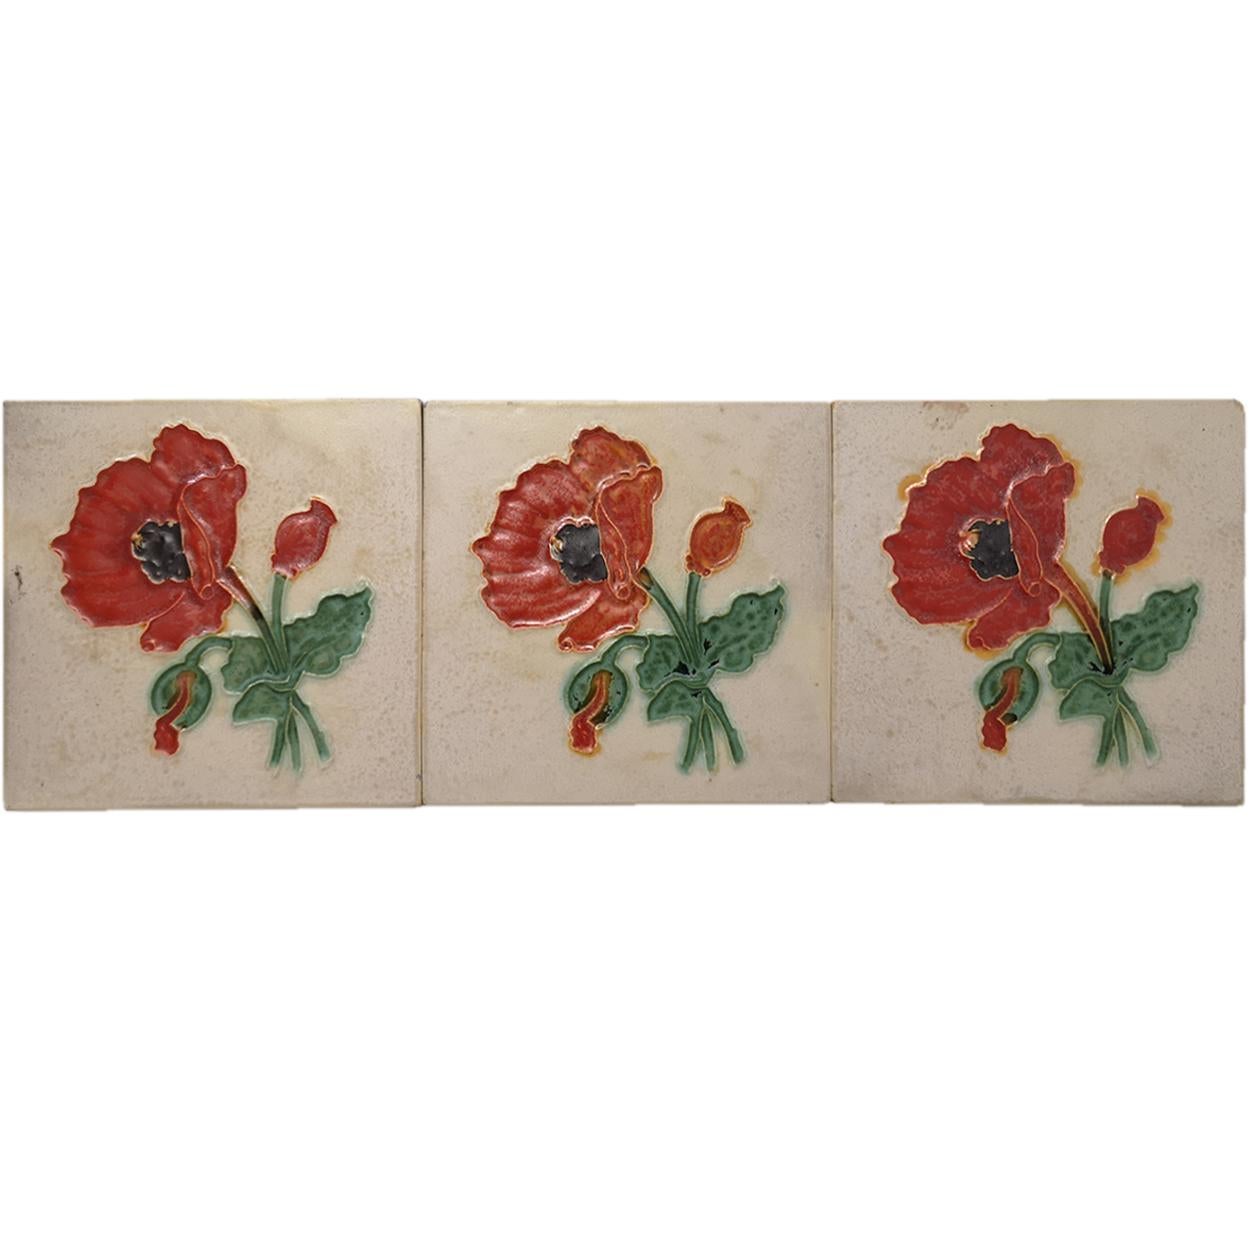 This is an amazing set of antique Art Nouveau handmade tiles with an image of a red Poppy in relief. These tiles would be charming displayed on easels, framed or incorporated into a custom tile design.

Please note that the price is per piece. We